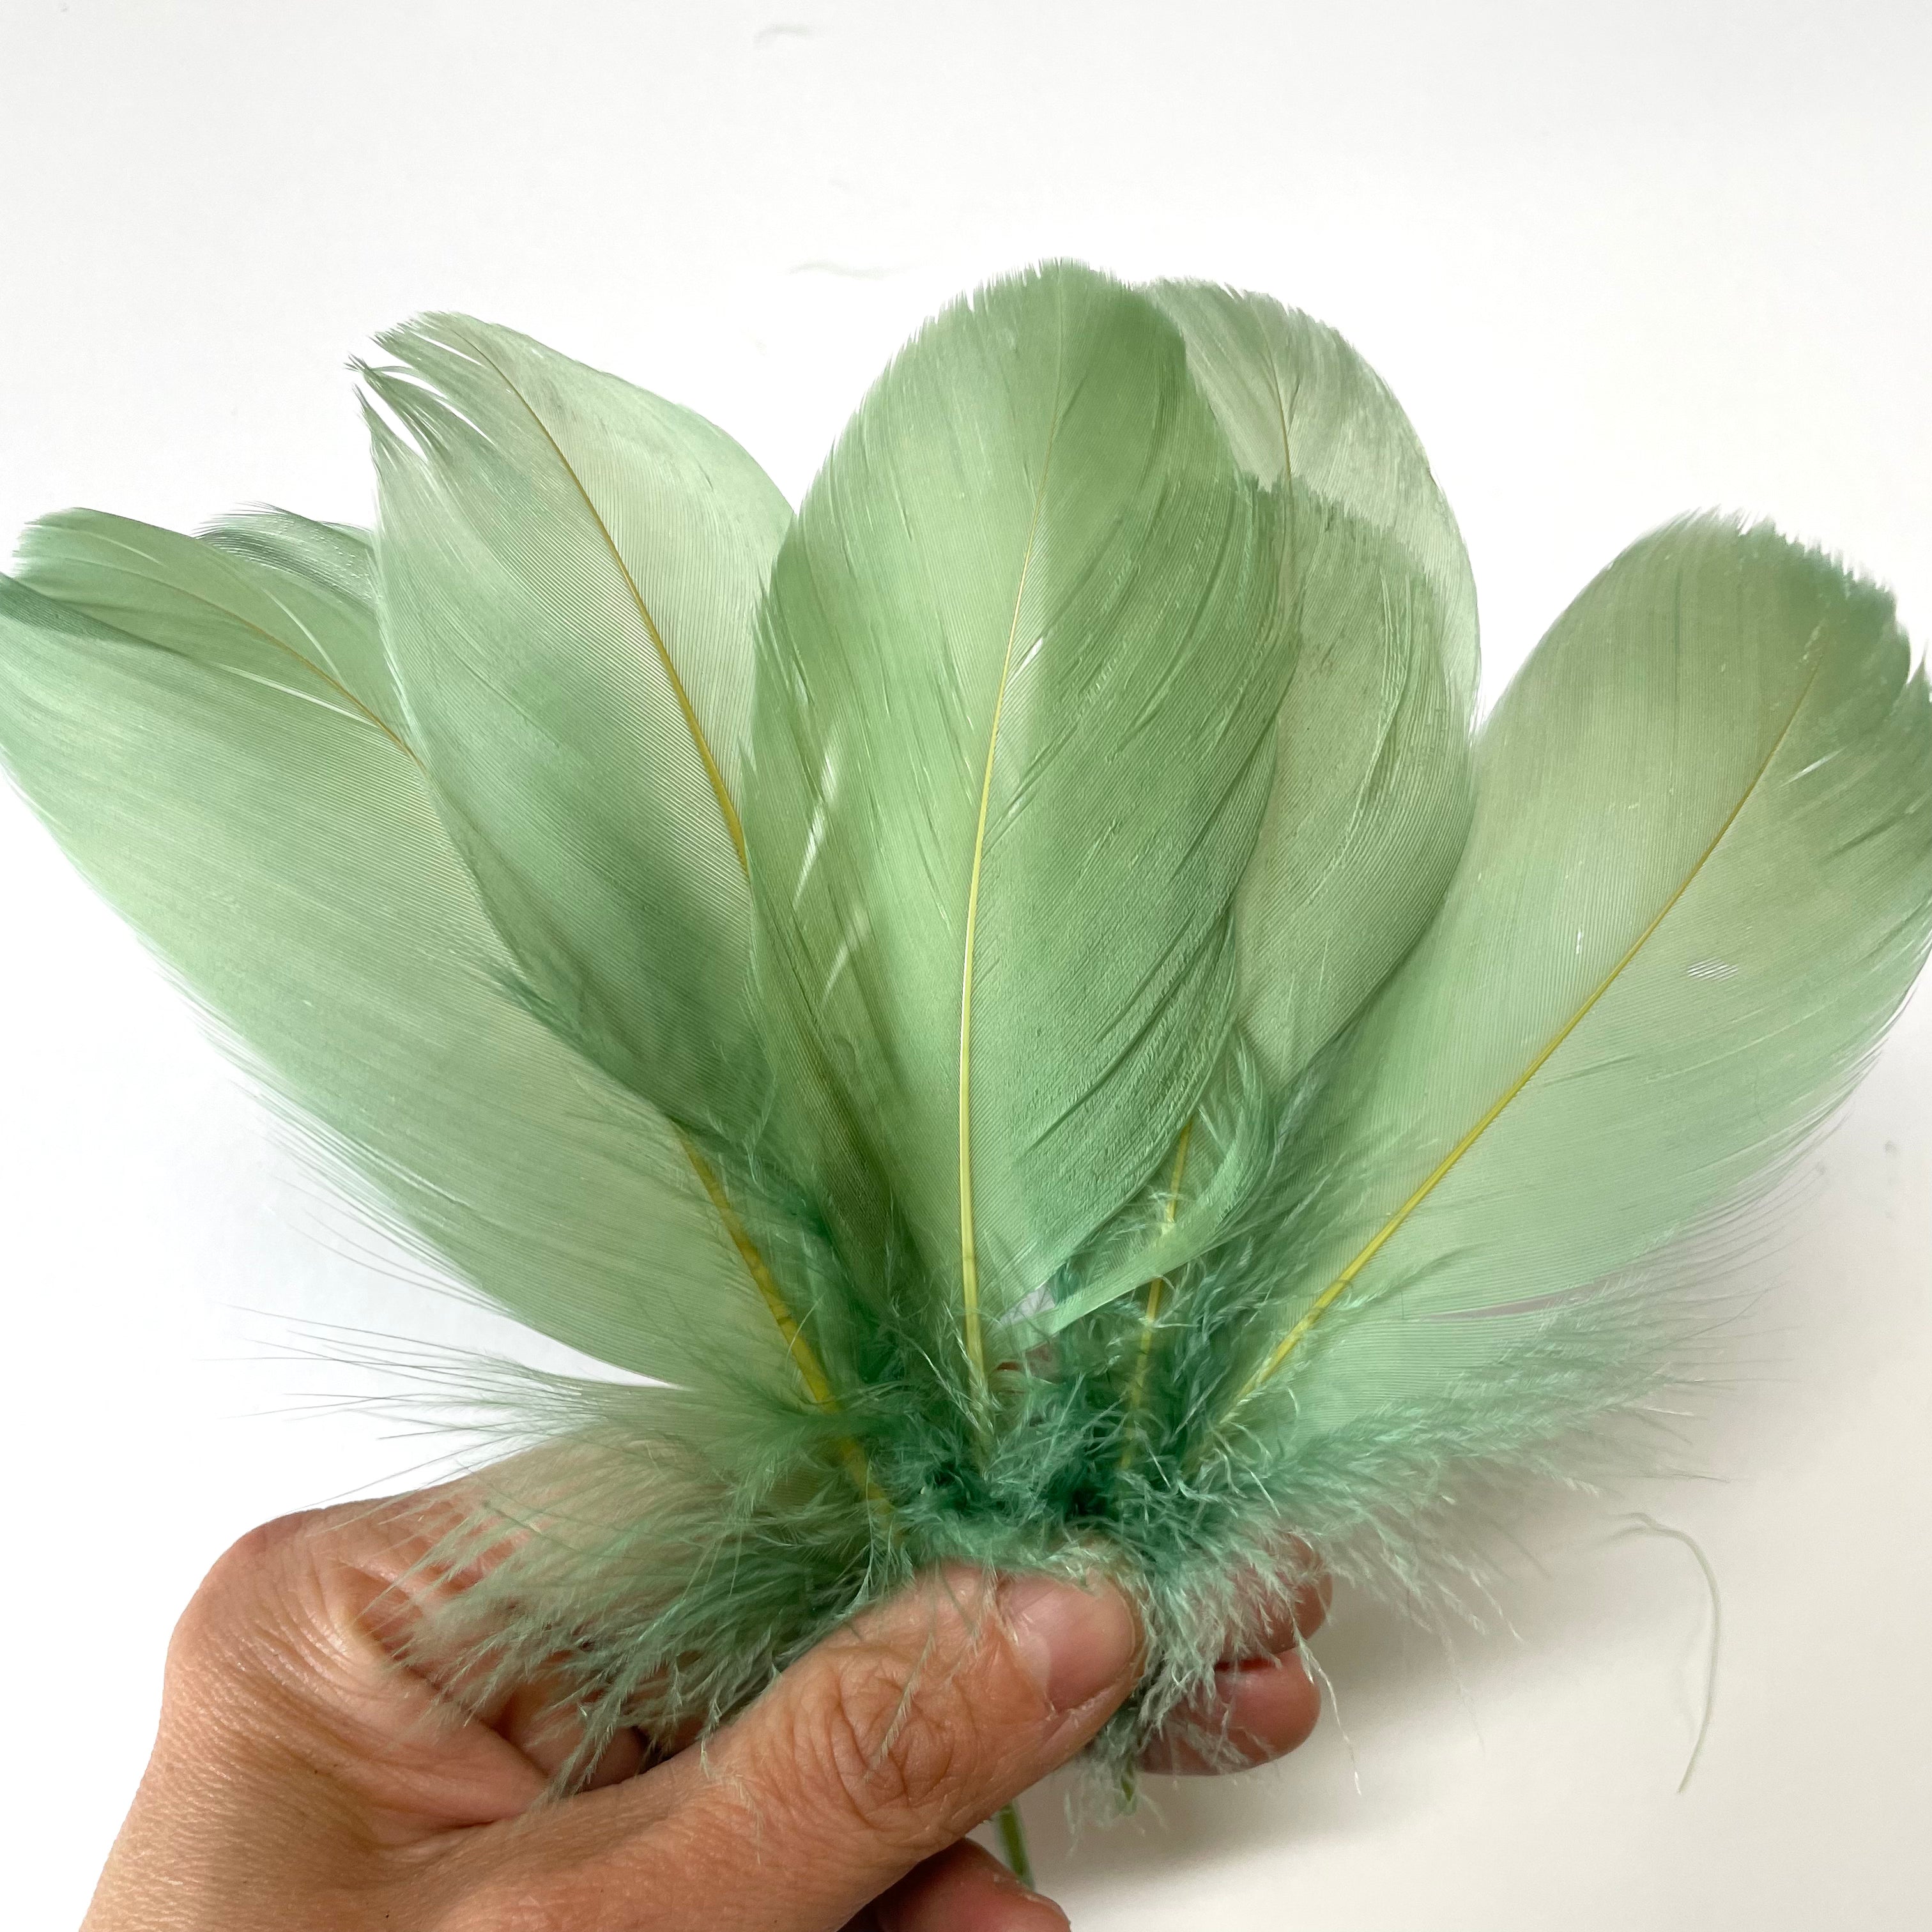 Goose Nagoire Feathers 10 grams - Sage